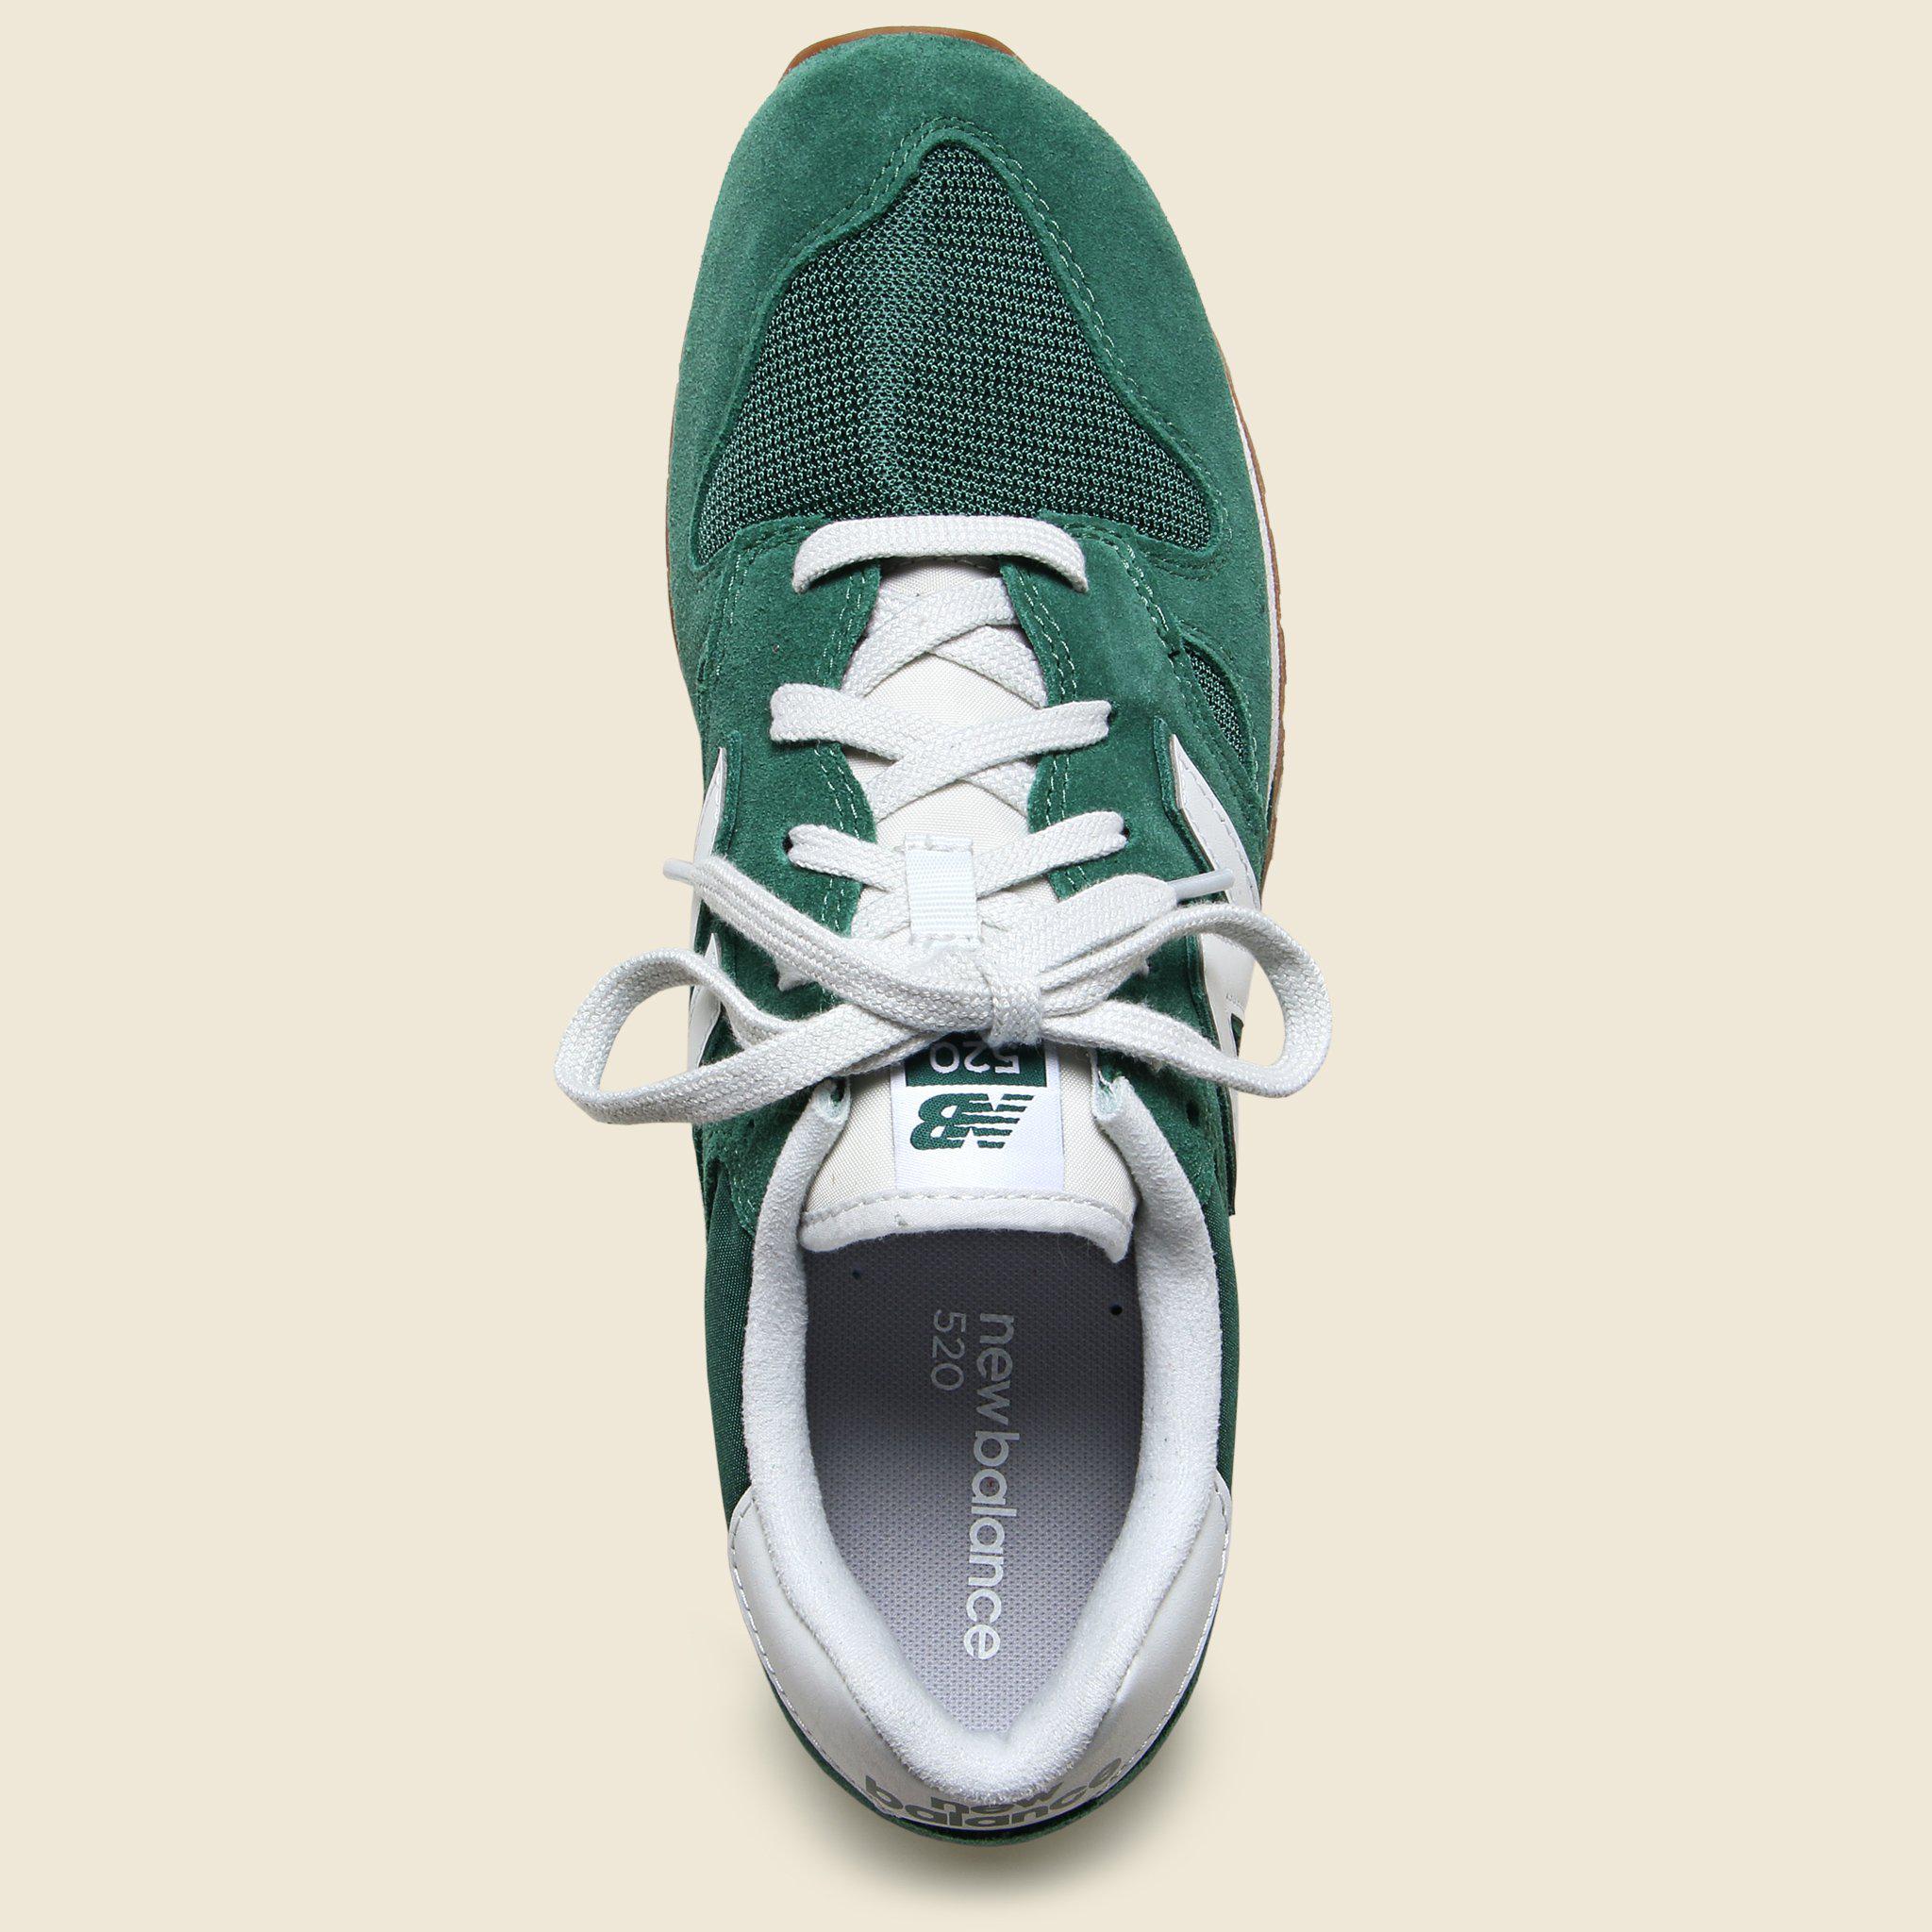 New Balance Suede 520 Sneaker - Forest Green for Men - Lyst